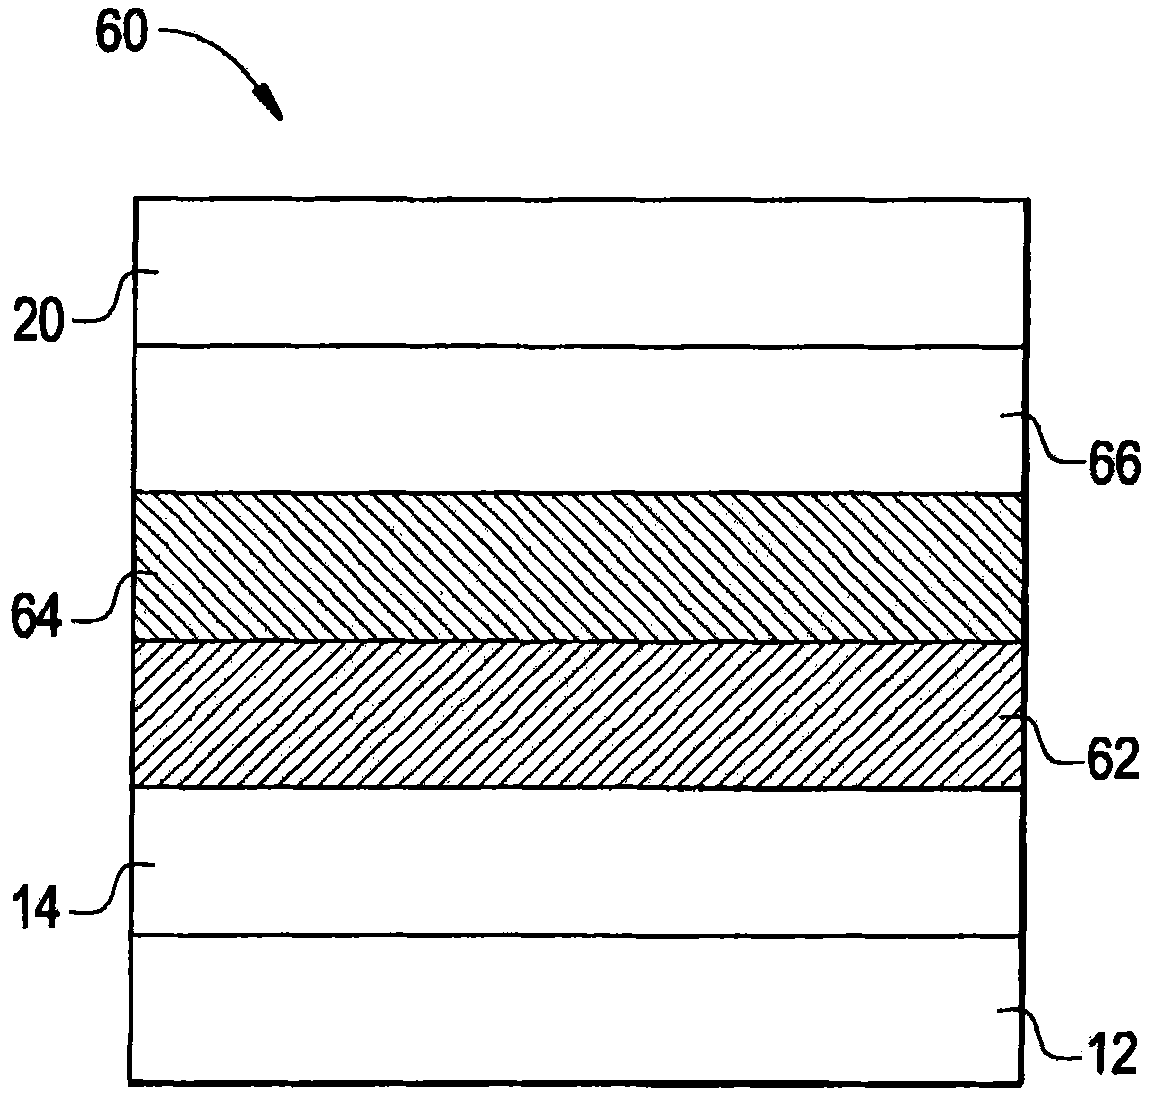 Method of manufacture of a multi-layer phosphorescent organic light emitting device, and articles thereof